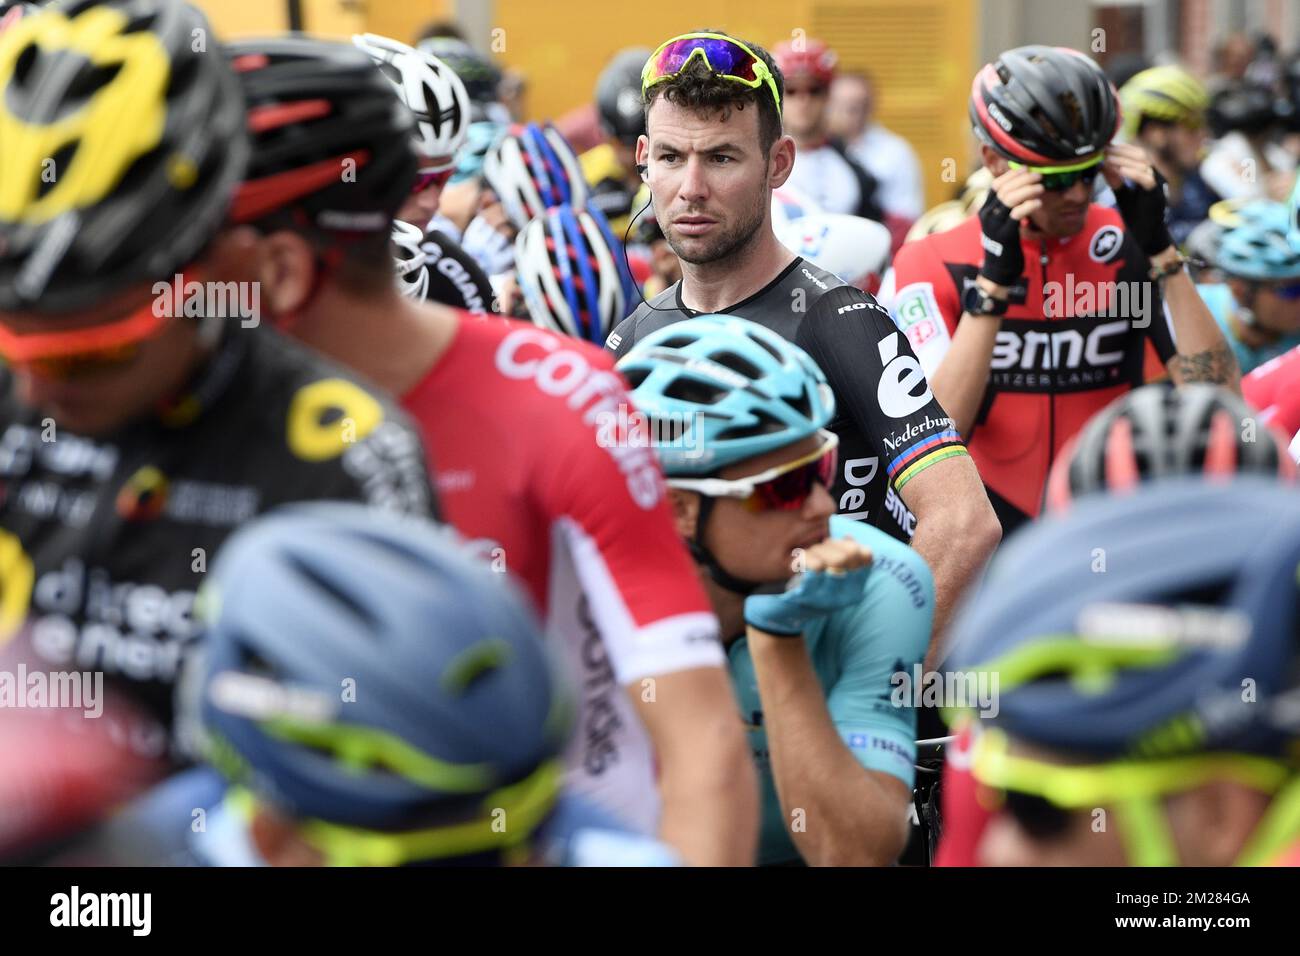 Great Britain Mark Cavendish of Dimension Data pictured before the start of the third stage of the 104th edition of the Tour de France cycling race, 212,5 km from Verviers, Belgium to Longwy, France, Monday 03 July 2017. This year's Tour de France takes place from July first to July 23rd. BELGA PHOTO YORICK JANSENS Stock Photo